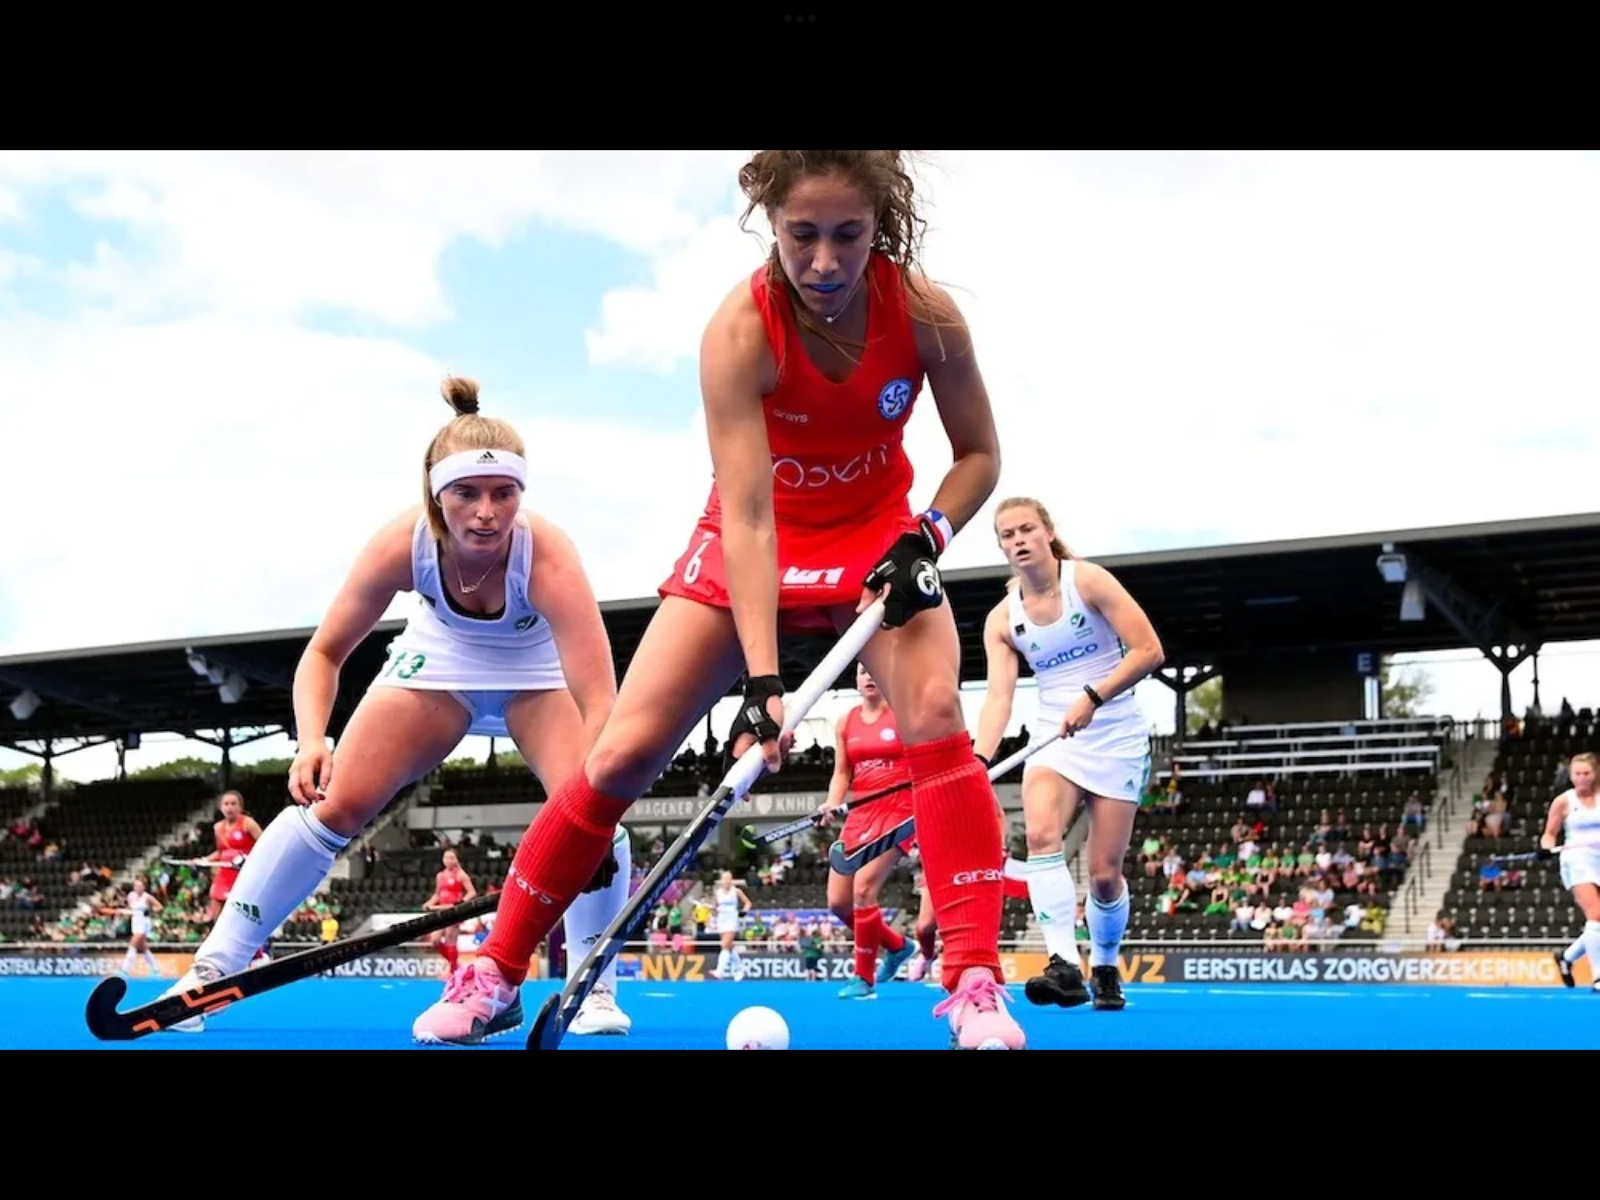 Day Four Witnesses Nerves, Thrilling Comebacks, Missed Opportunities, And High Tempo Matches. The Women’s World Cup held in Amstelveen and Terrassa saw a full display of nerves on its fourth day. 